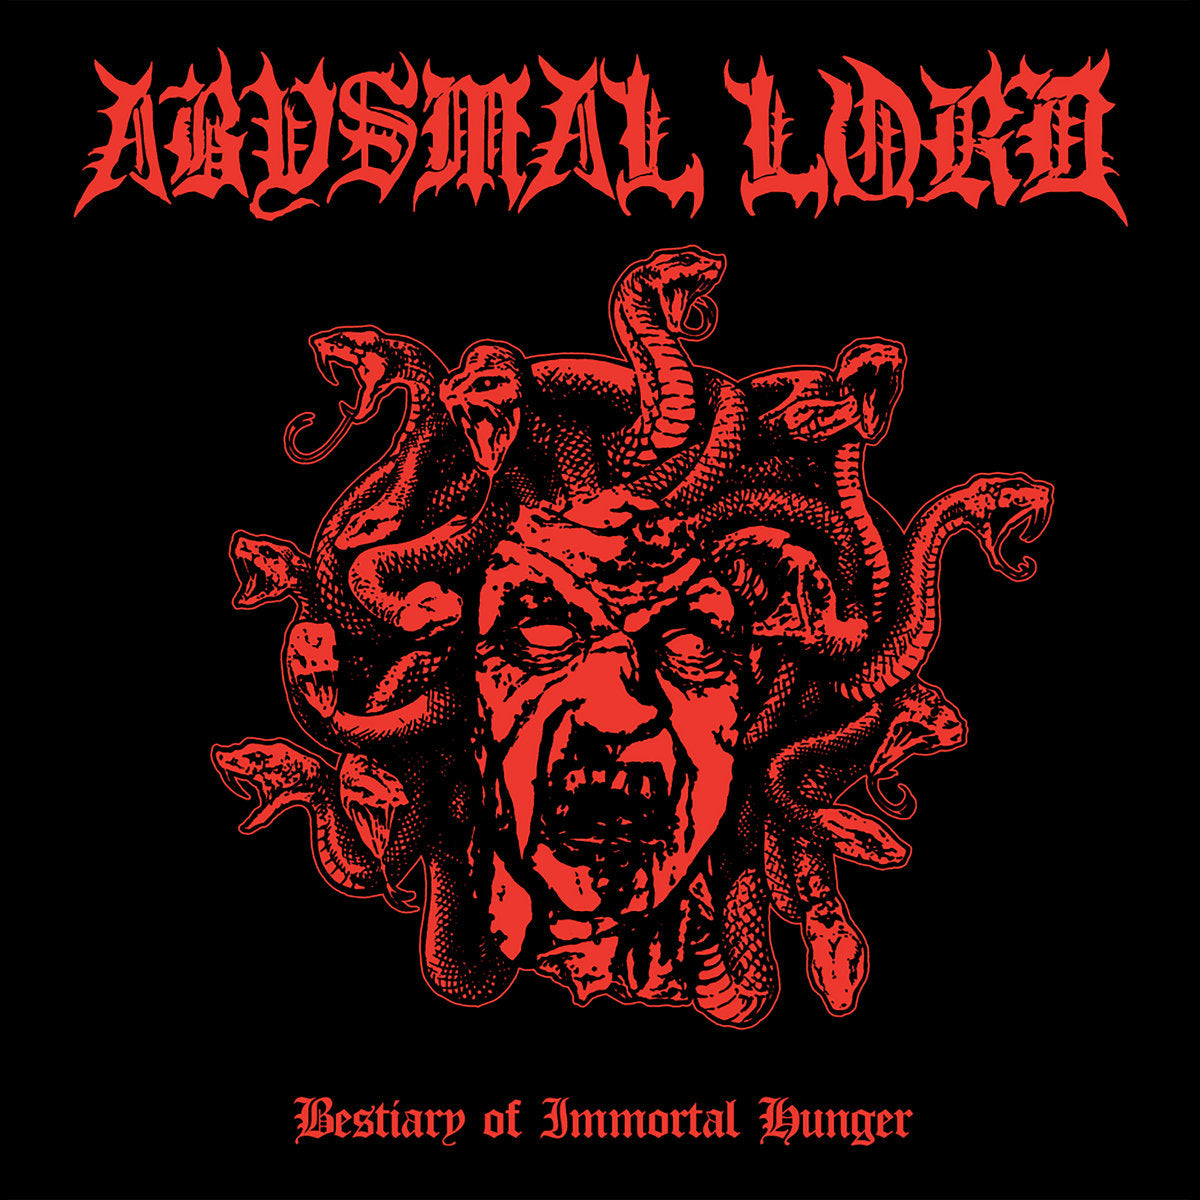 Abysmal Lord - Bestiary of Immortal Hunger LP